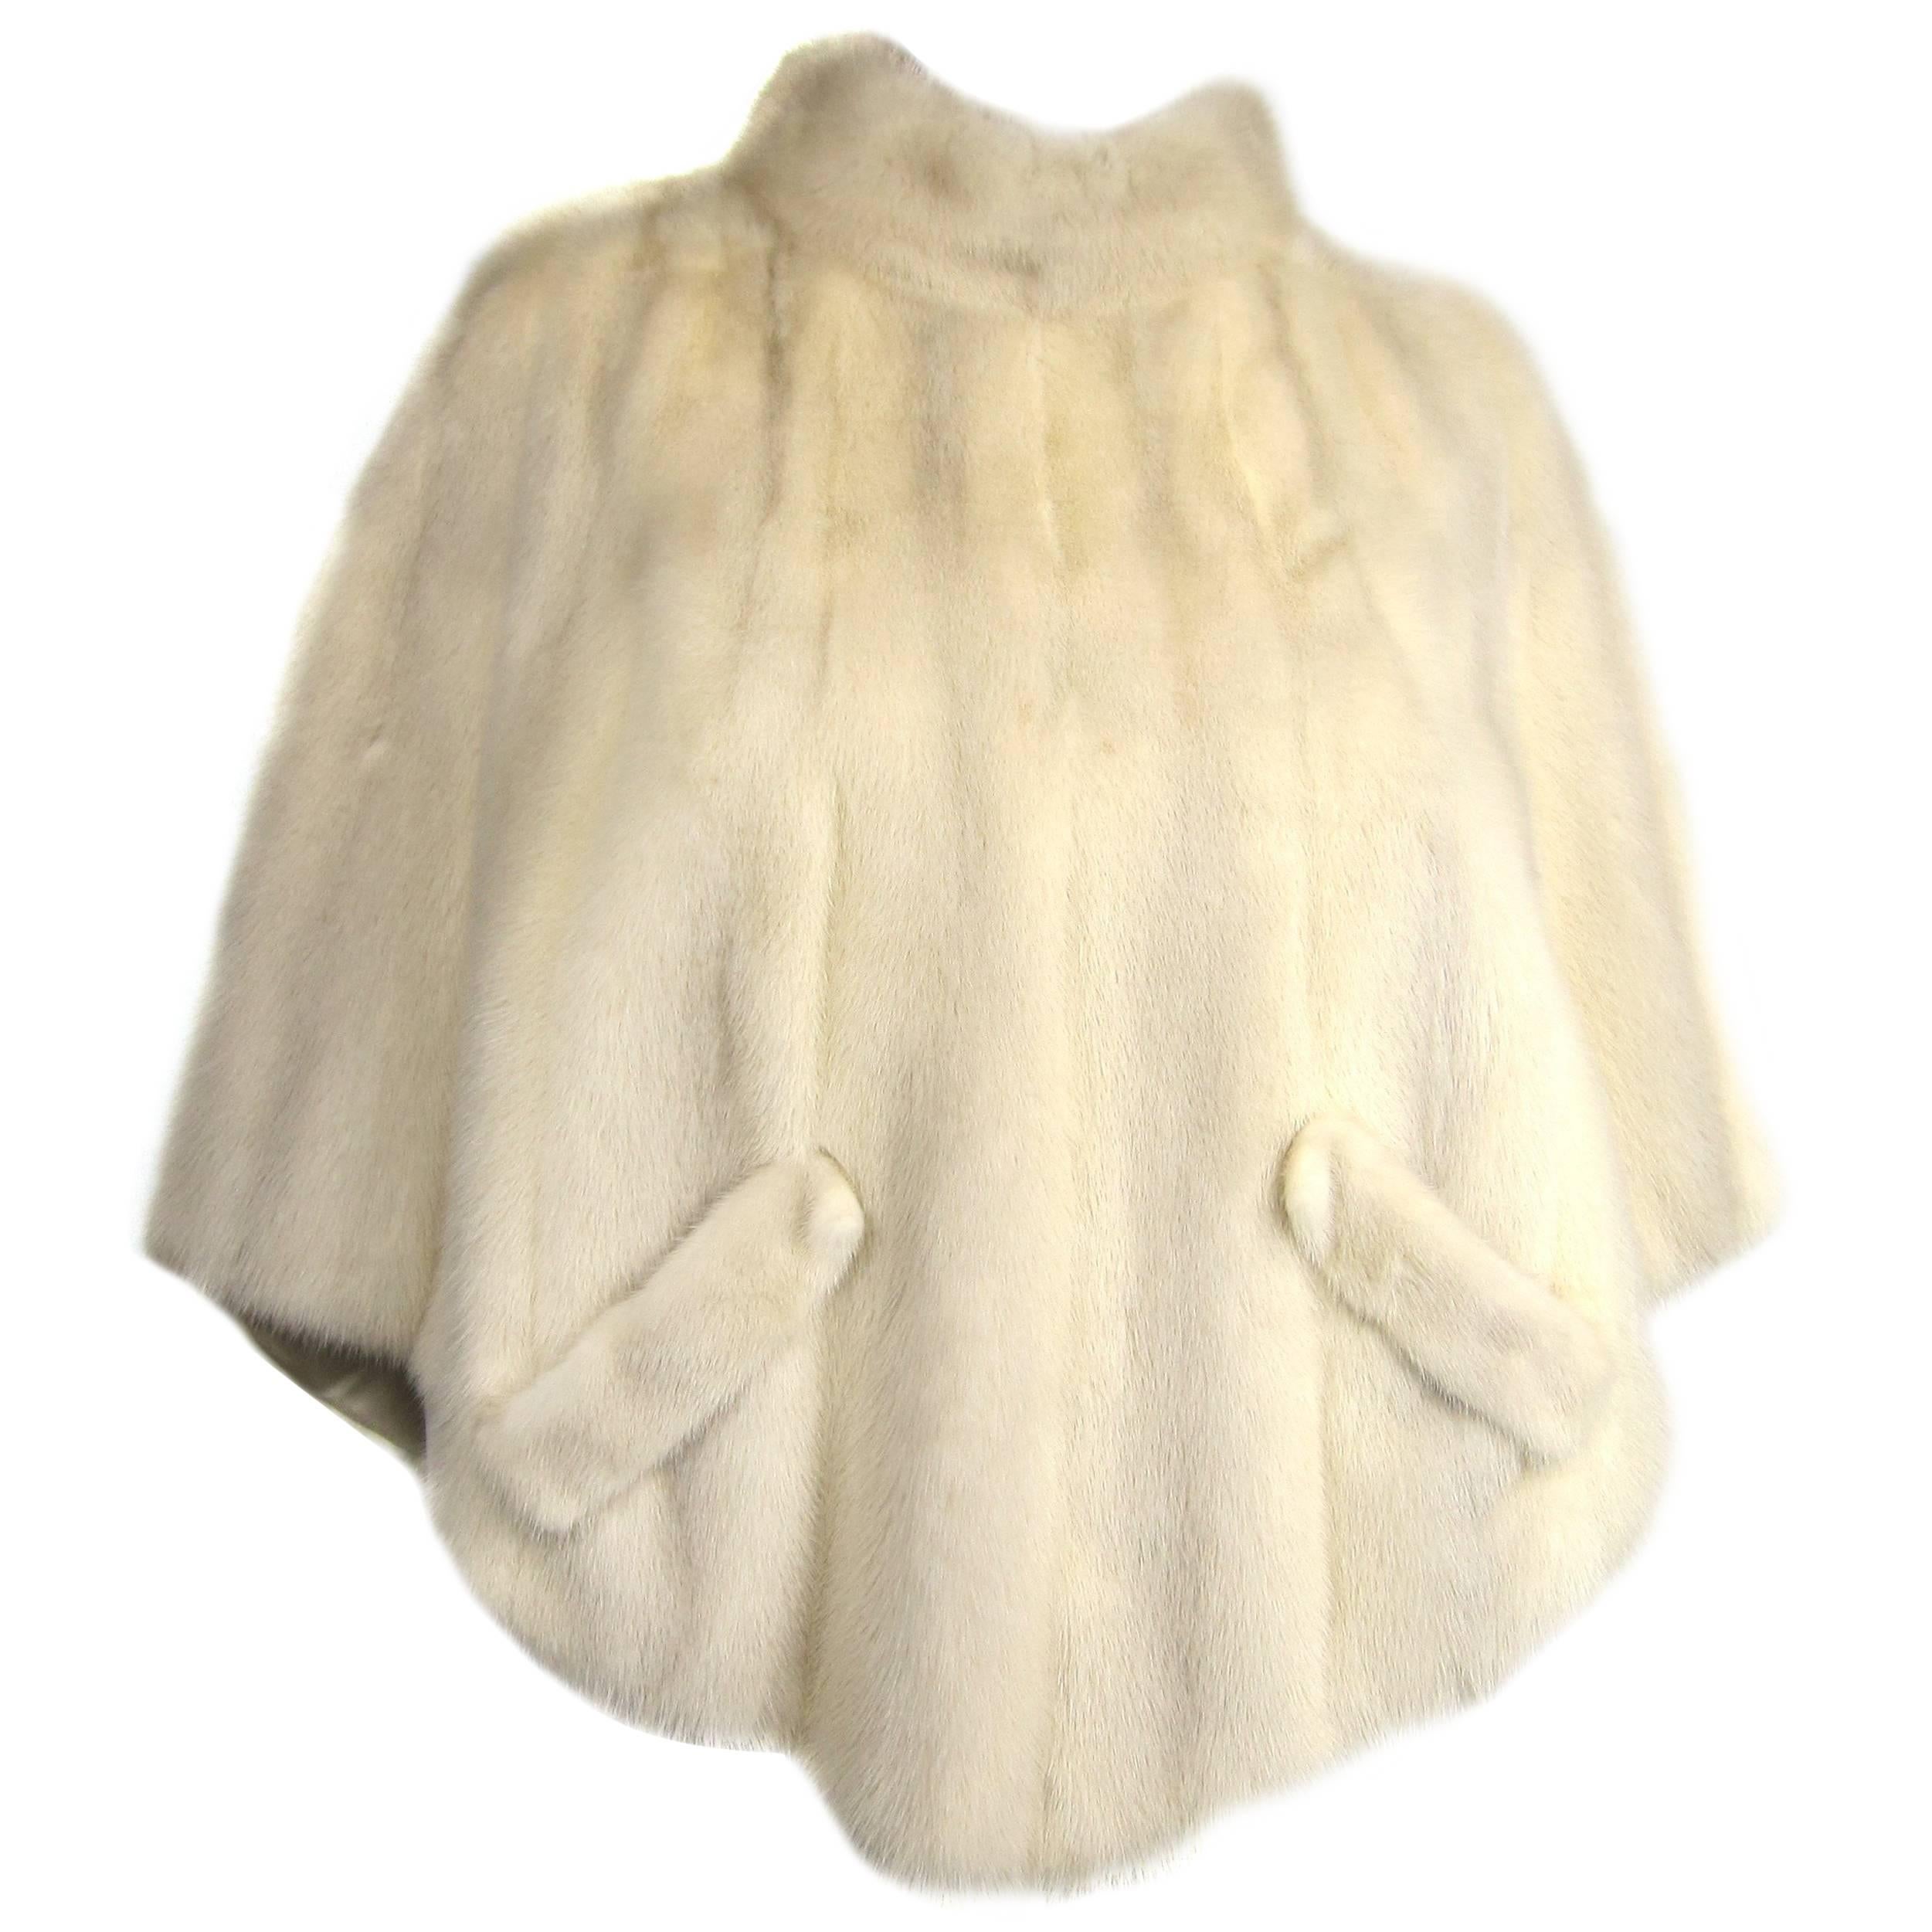  Pearl White Mink Fur Shrug Shawl Cape 1960s Double Sided 